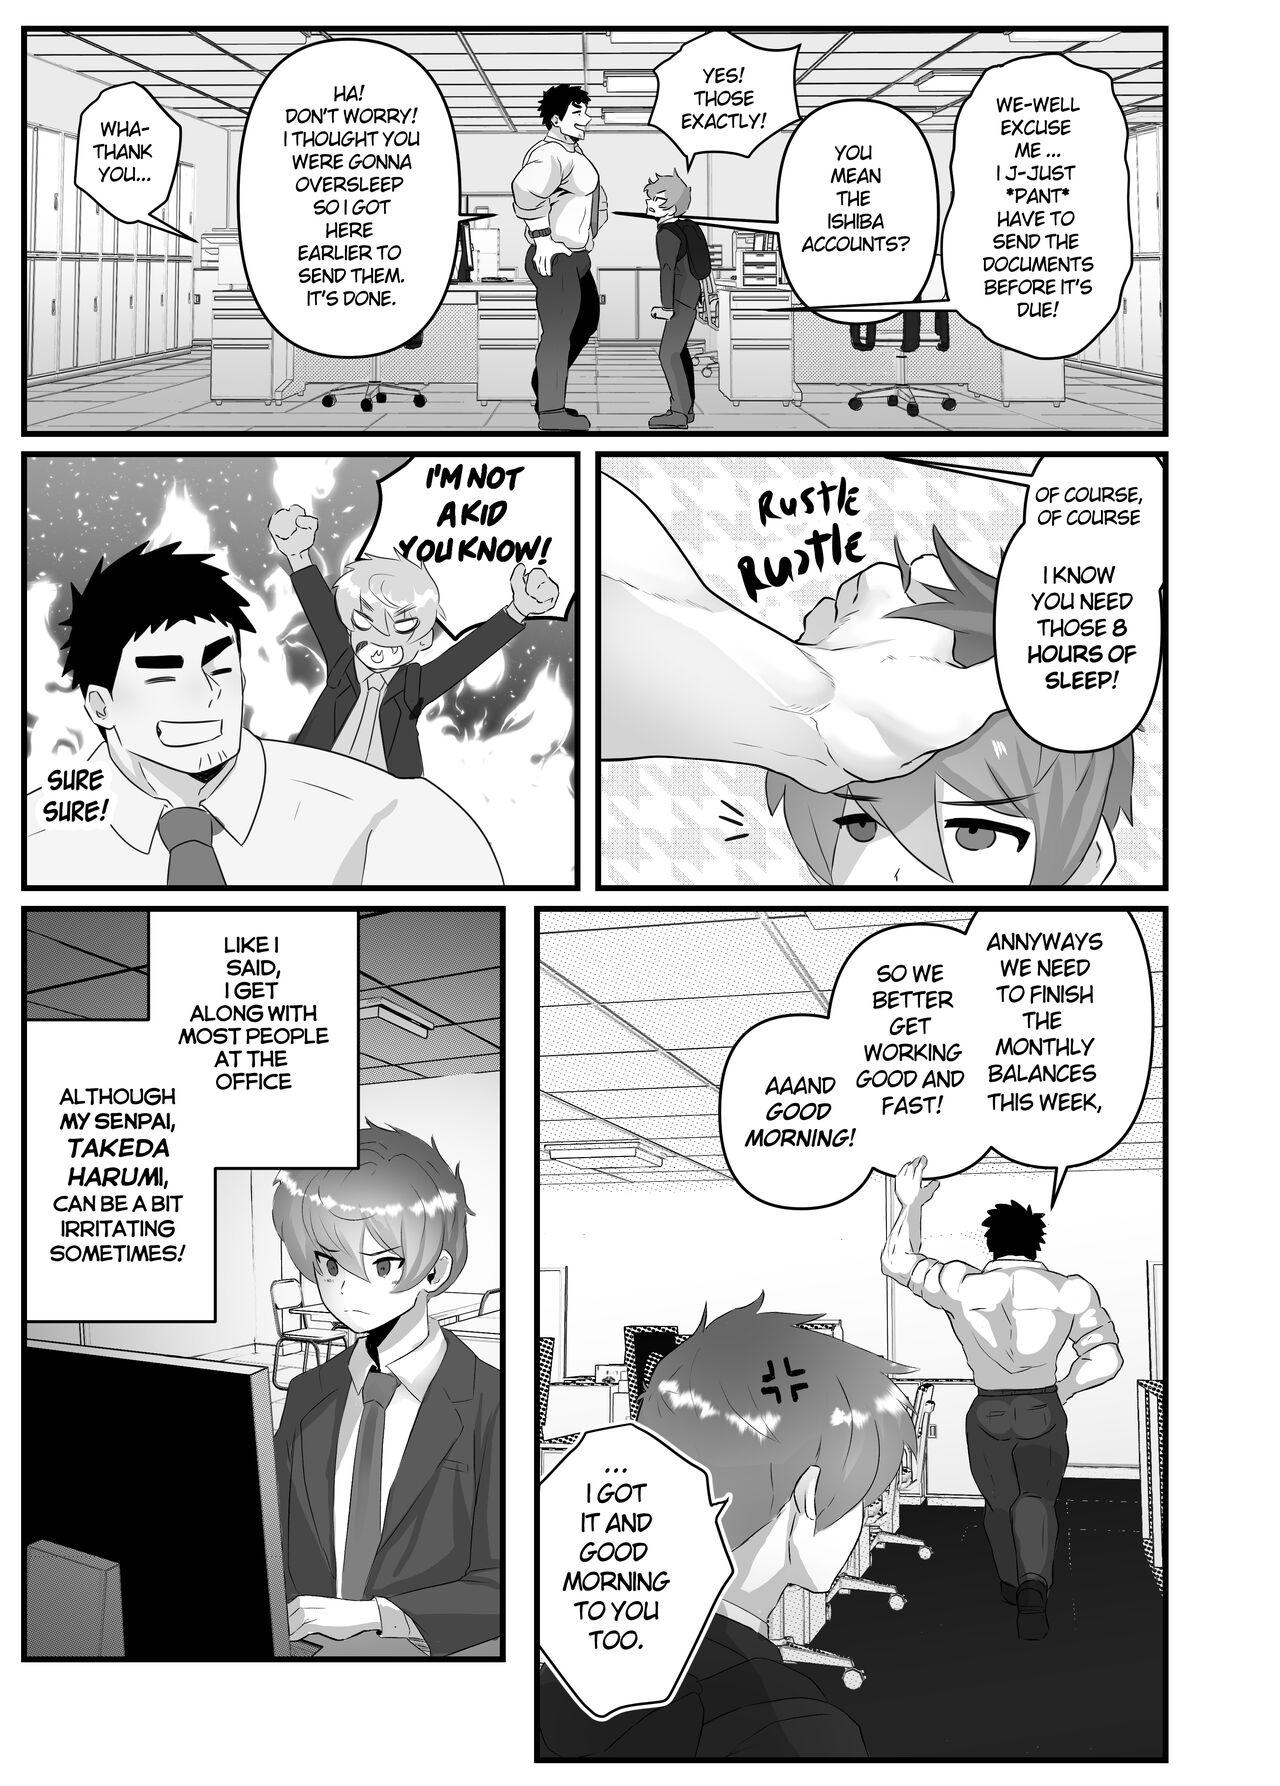 Internal Working Overtime Lez - Page 7